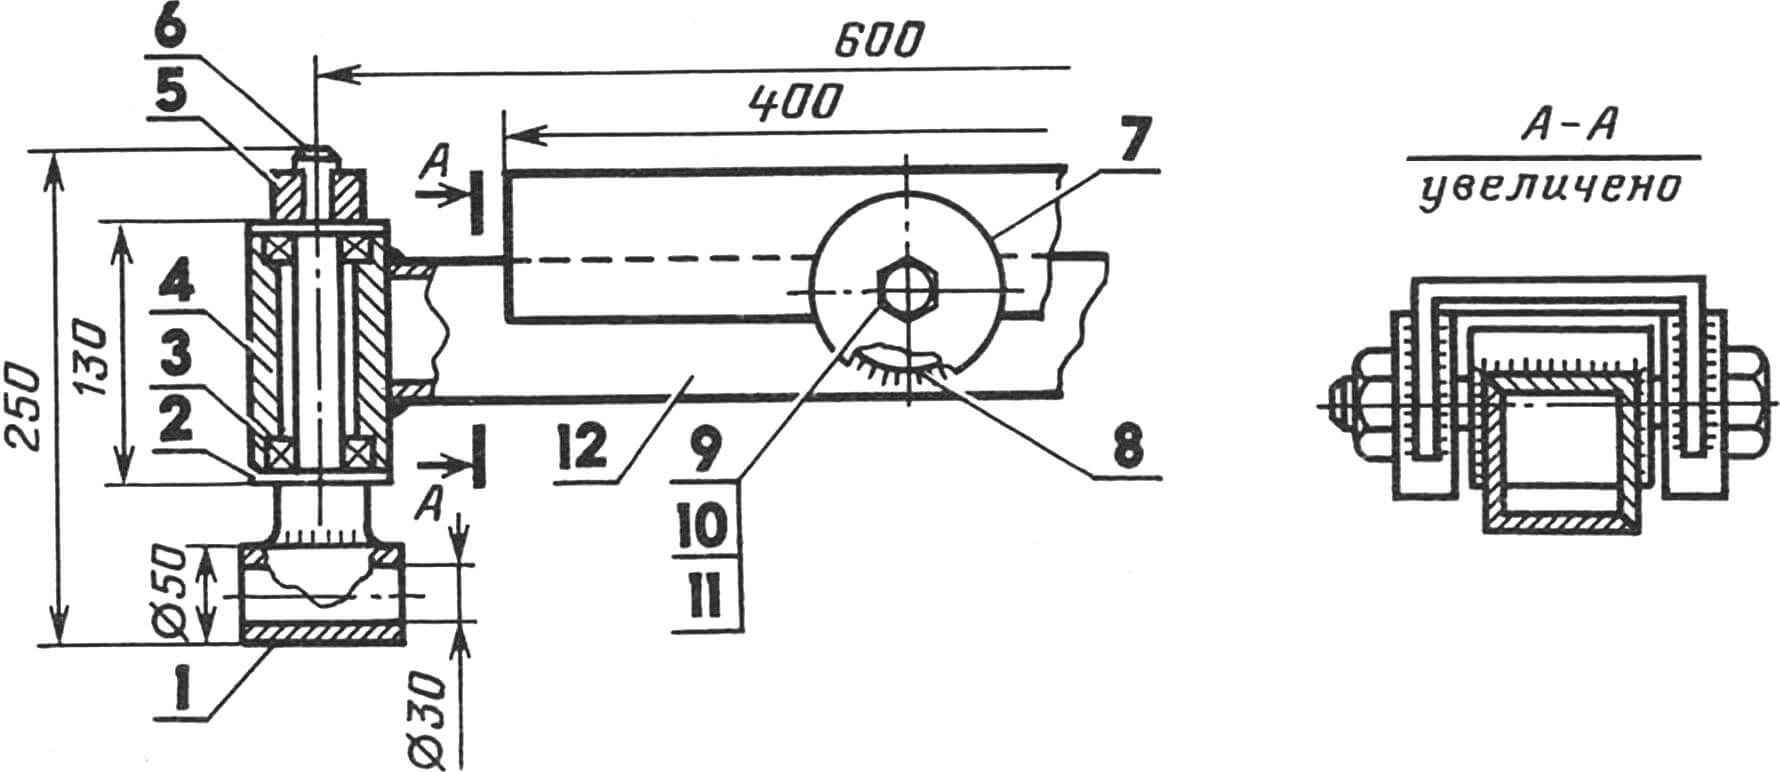 Structural features of the front axle manufacturing